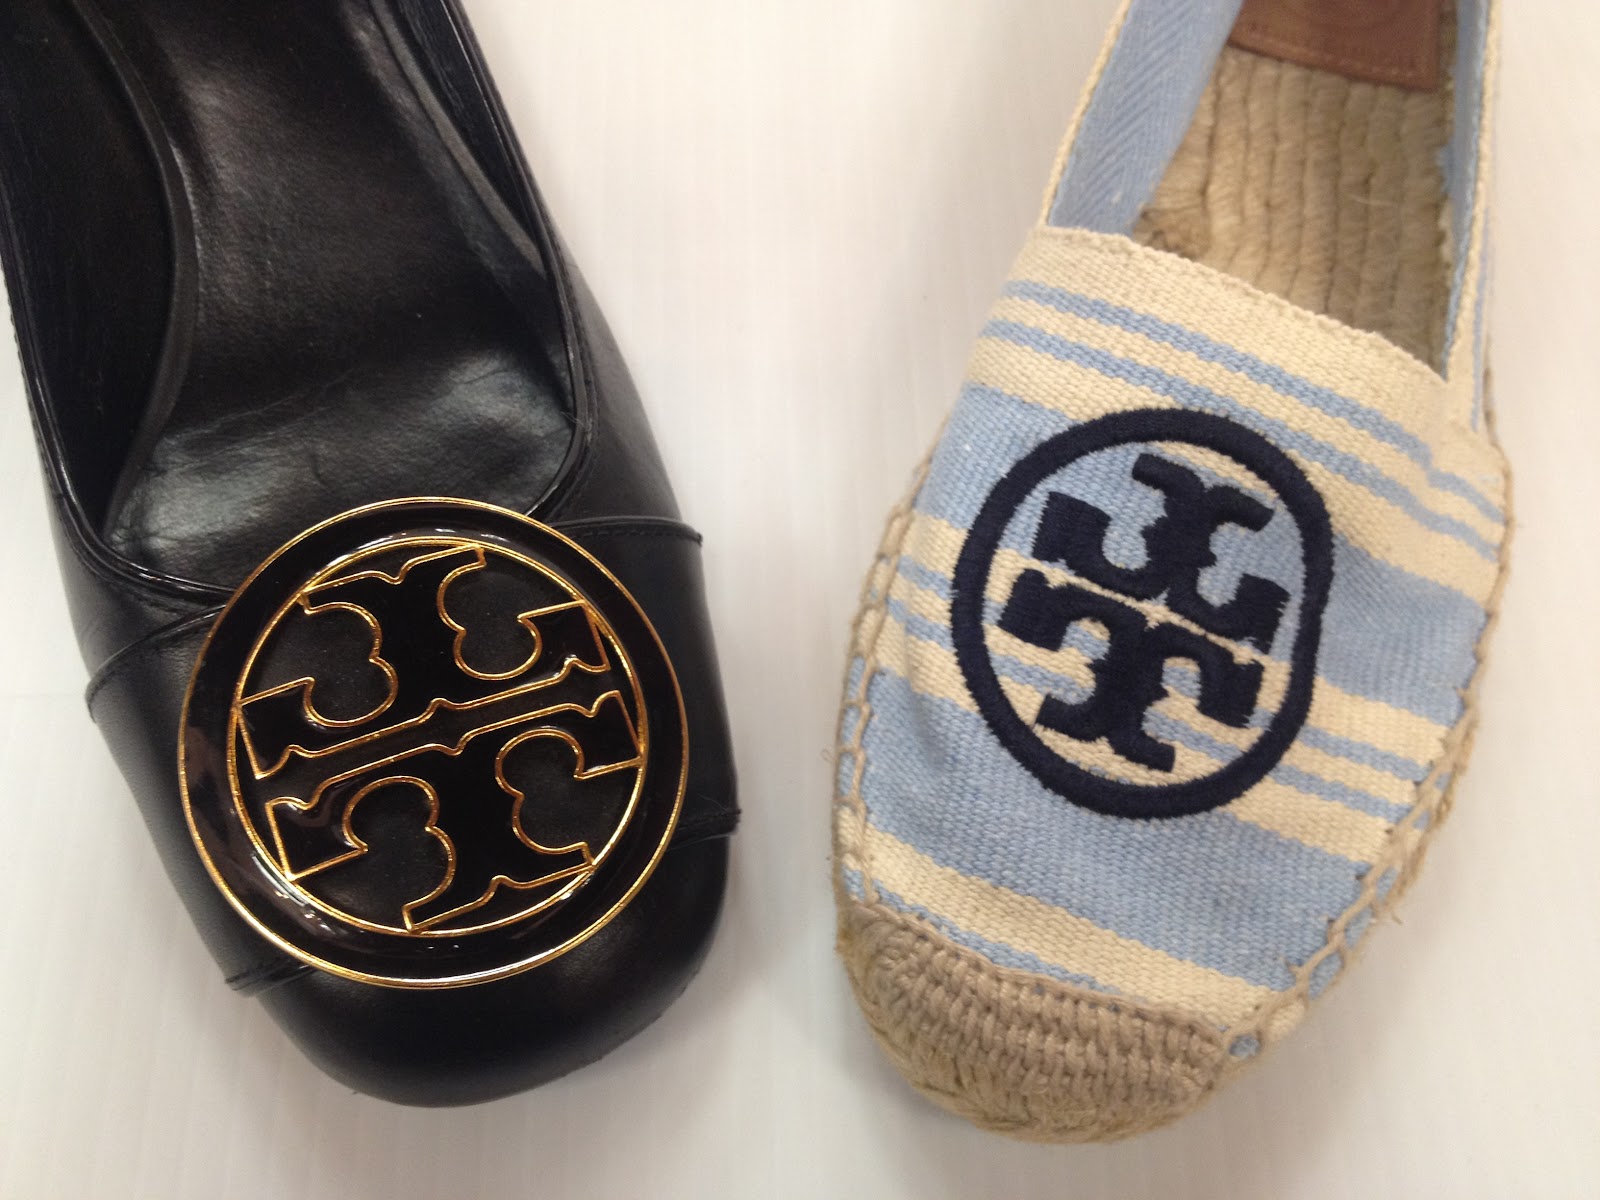 Past & Present Designer Consignment Boutique: Tory Burch for Everyone!